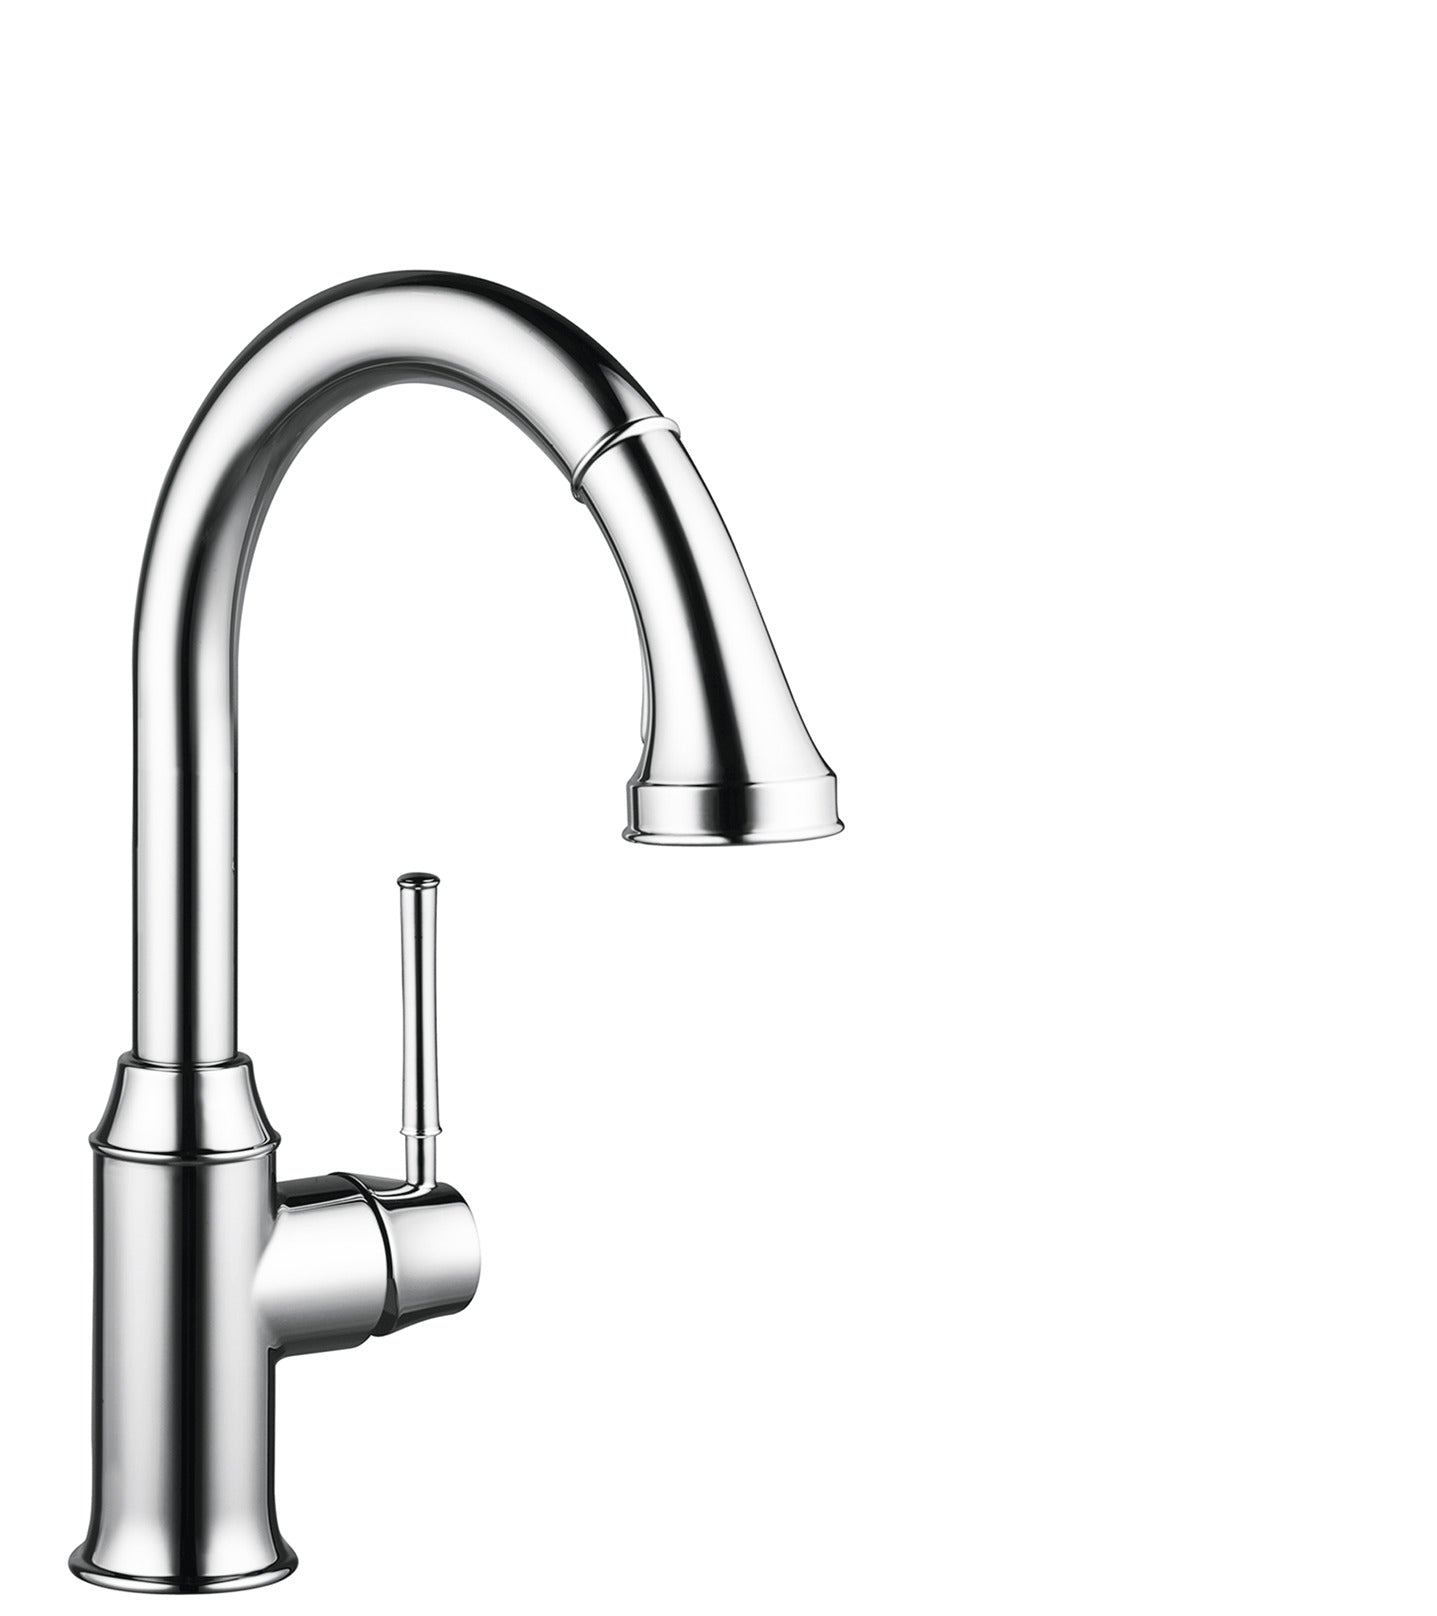 HANSGROHE 04215000 Chrome Talis C Classic Kitchen Faucet 1.75 GPM